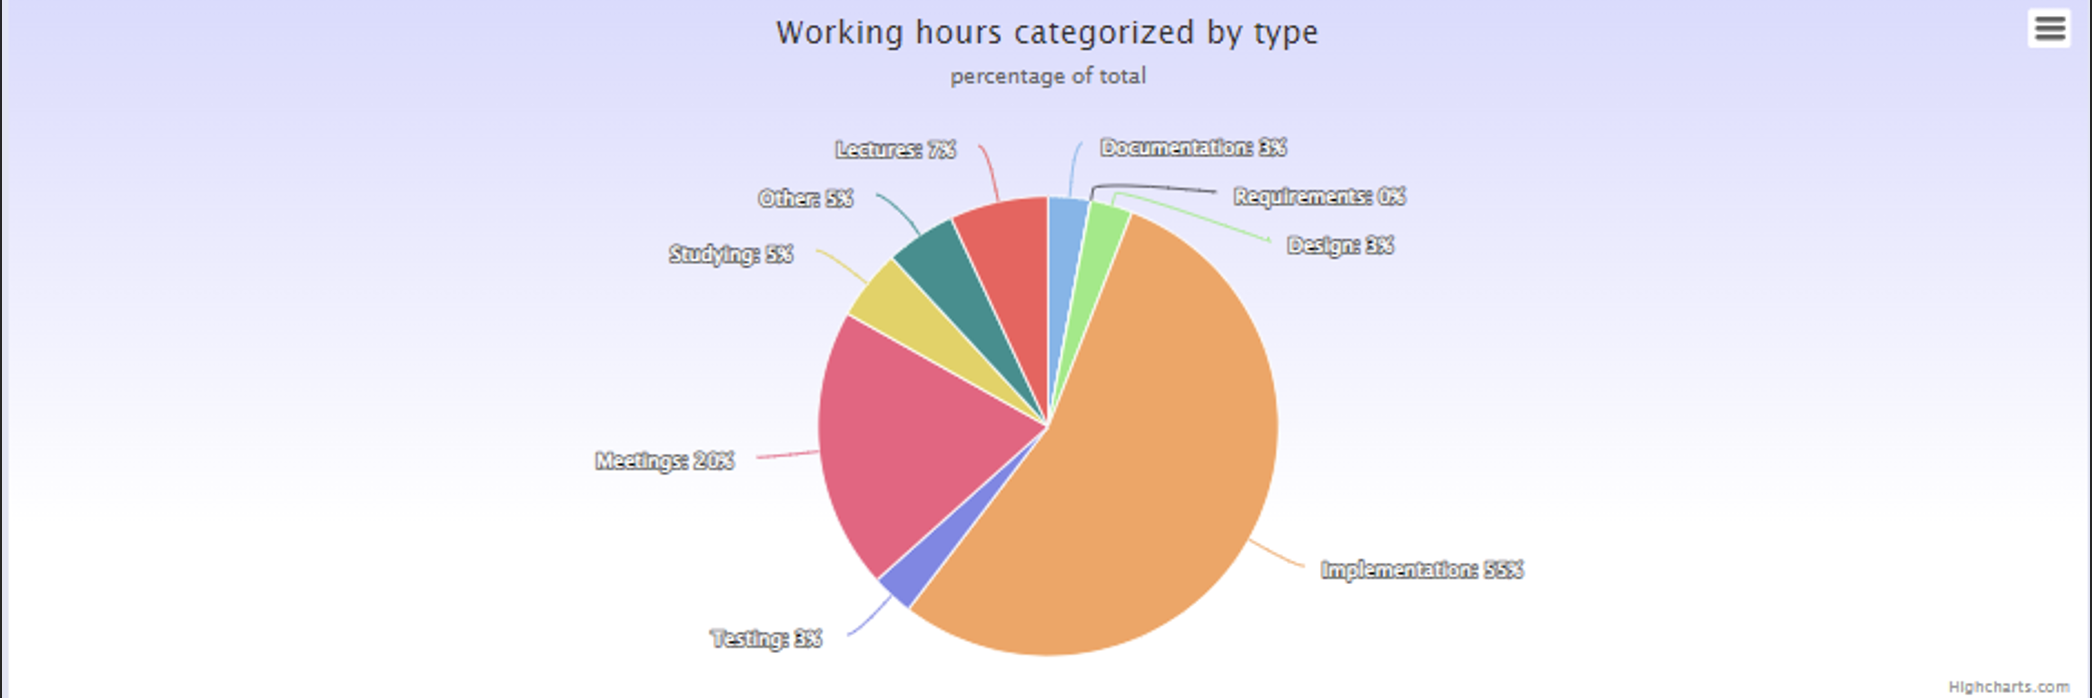 Working hours of the project categorized